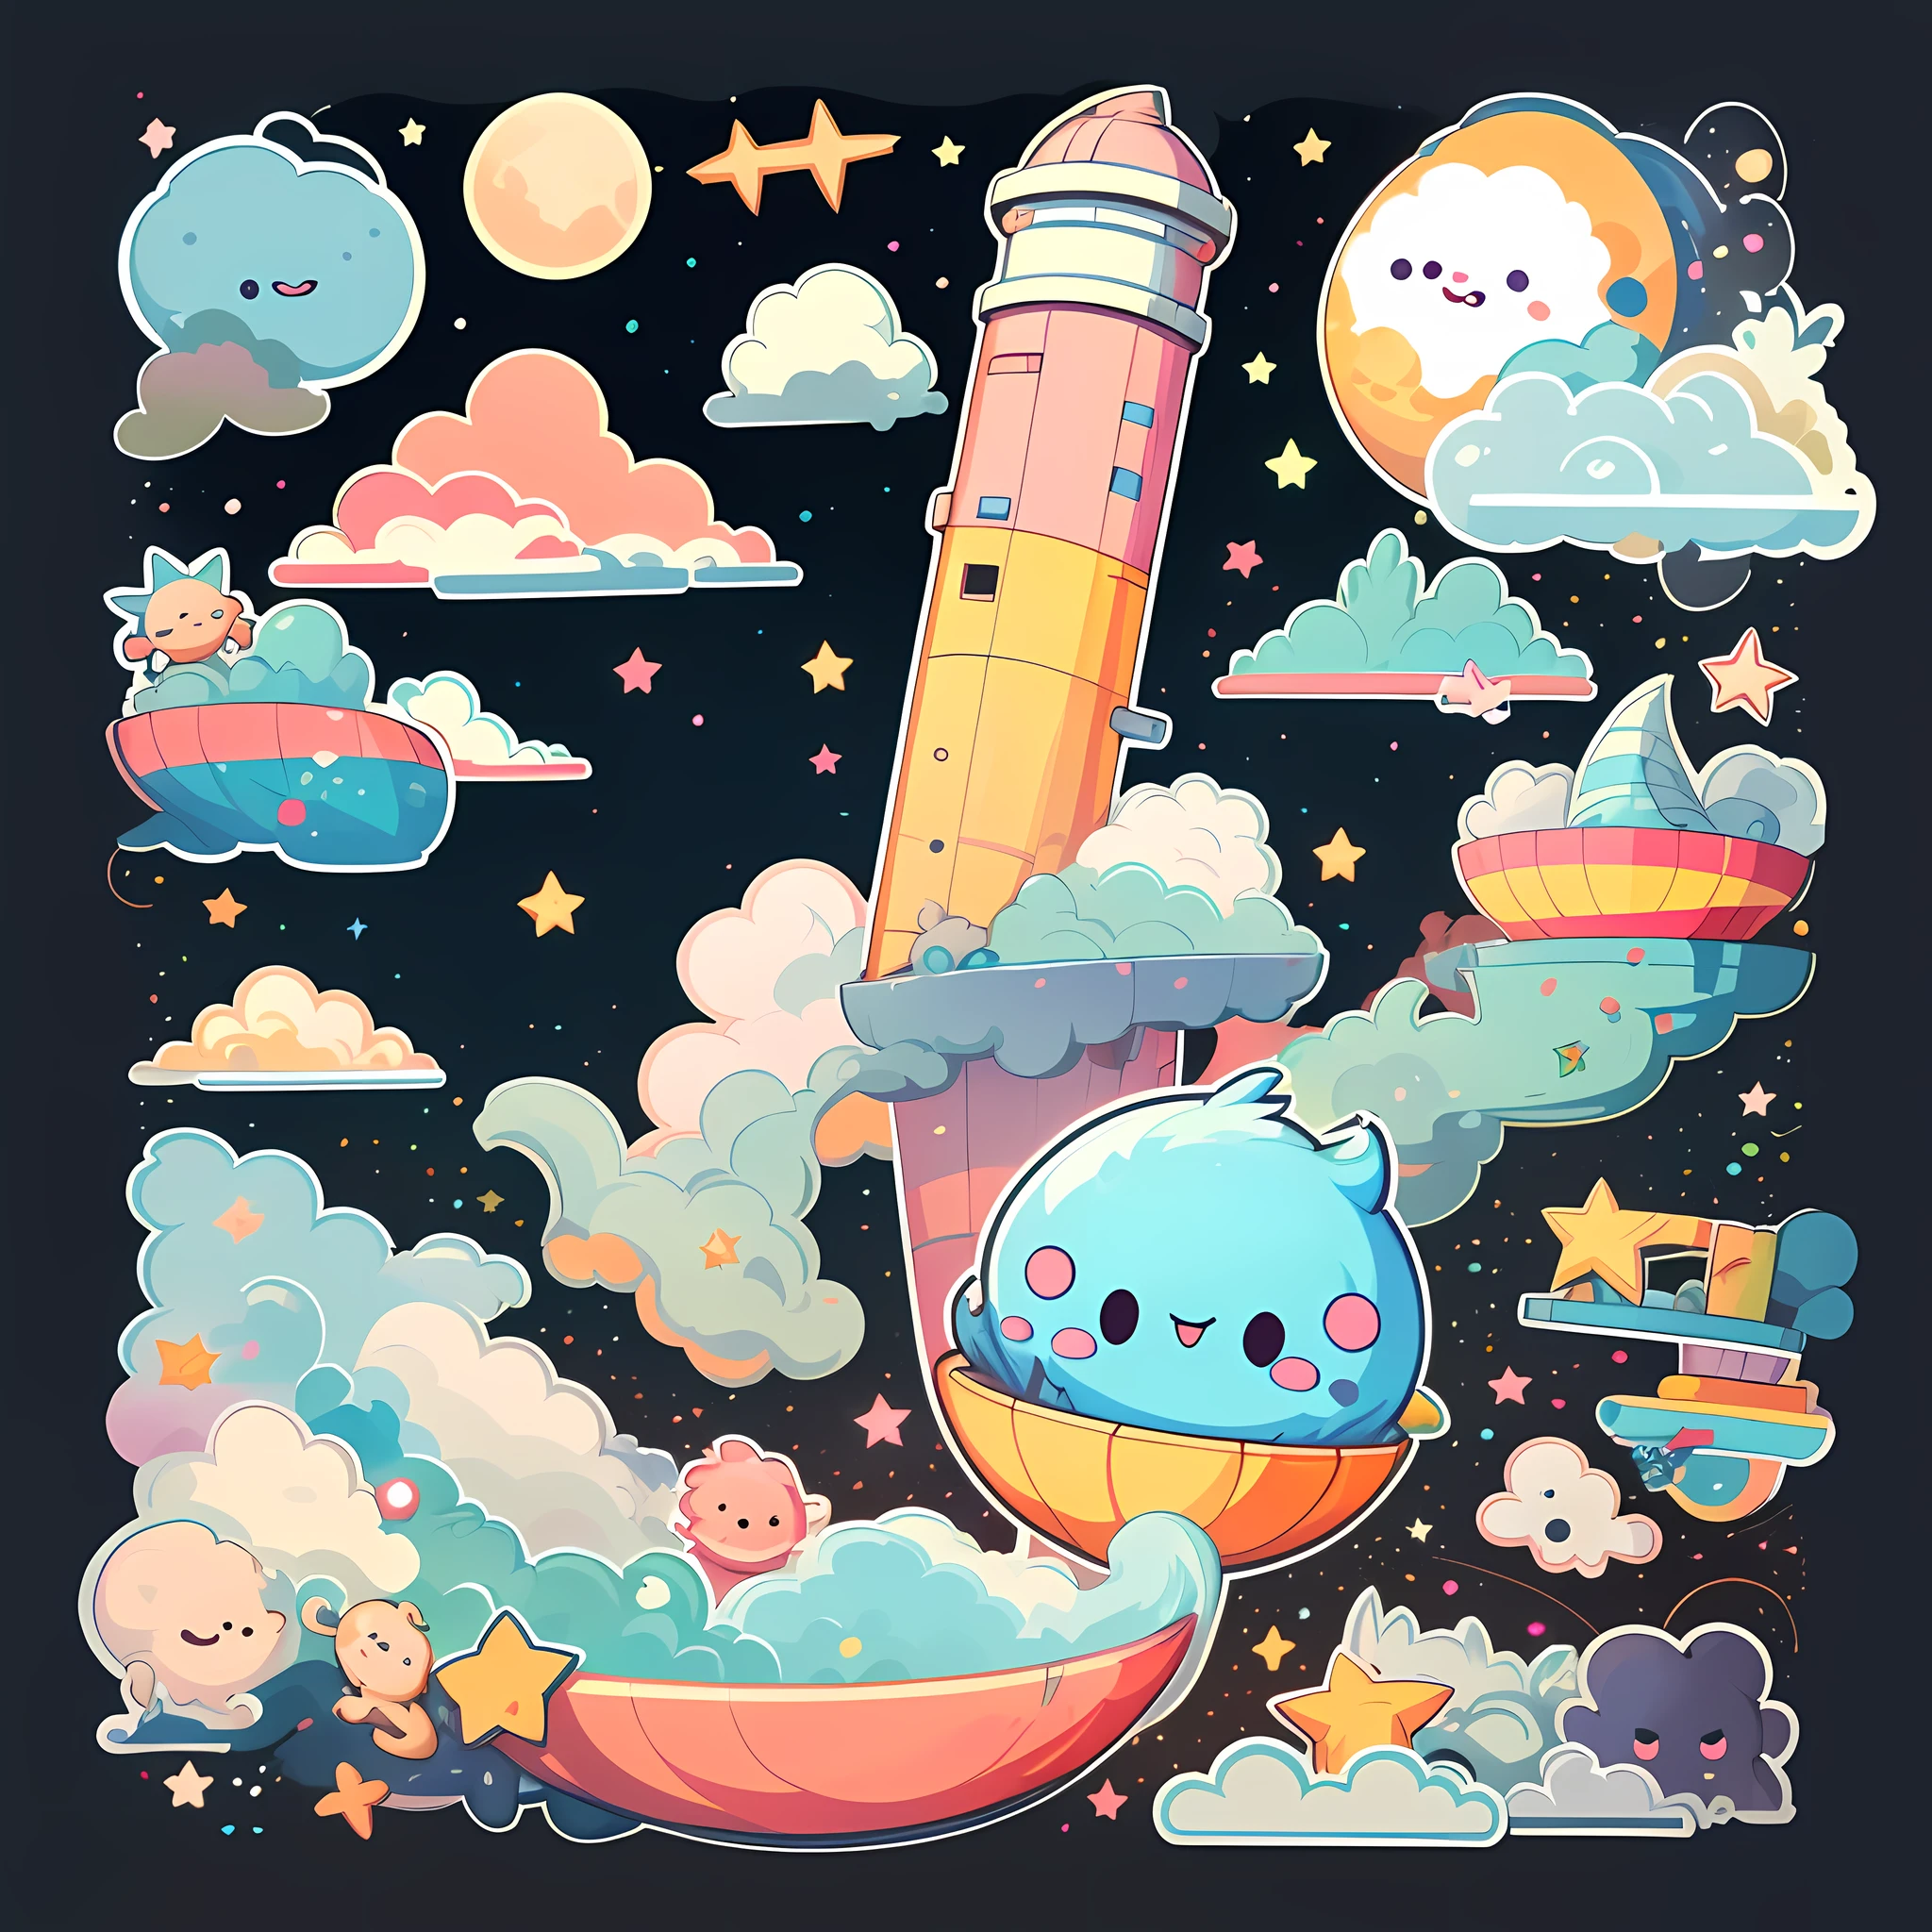 Cartoon illustration with pencil on sky background and clouds, fantasy sticker illustration, space magical whale, space ship gribble, cartoon fantasy spaceship, Cute detailed digital art, sky whales, flying cloud castle, cute detailed artwork, spaceships in the cloudy sky, space whale, the wizard's magical tower!!, stickers illustrations, Flying spaceship, space clouds, small spaceships